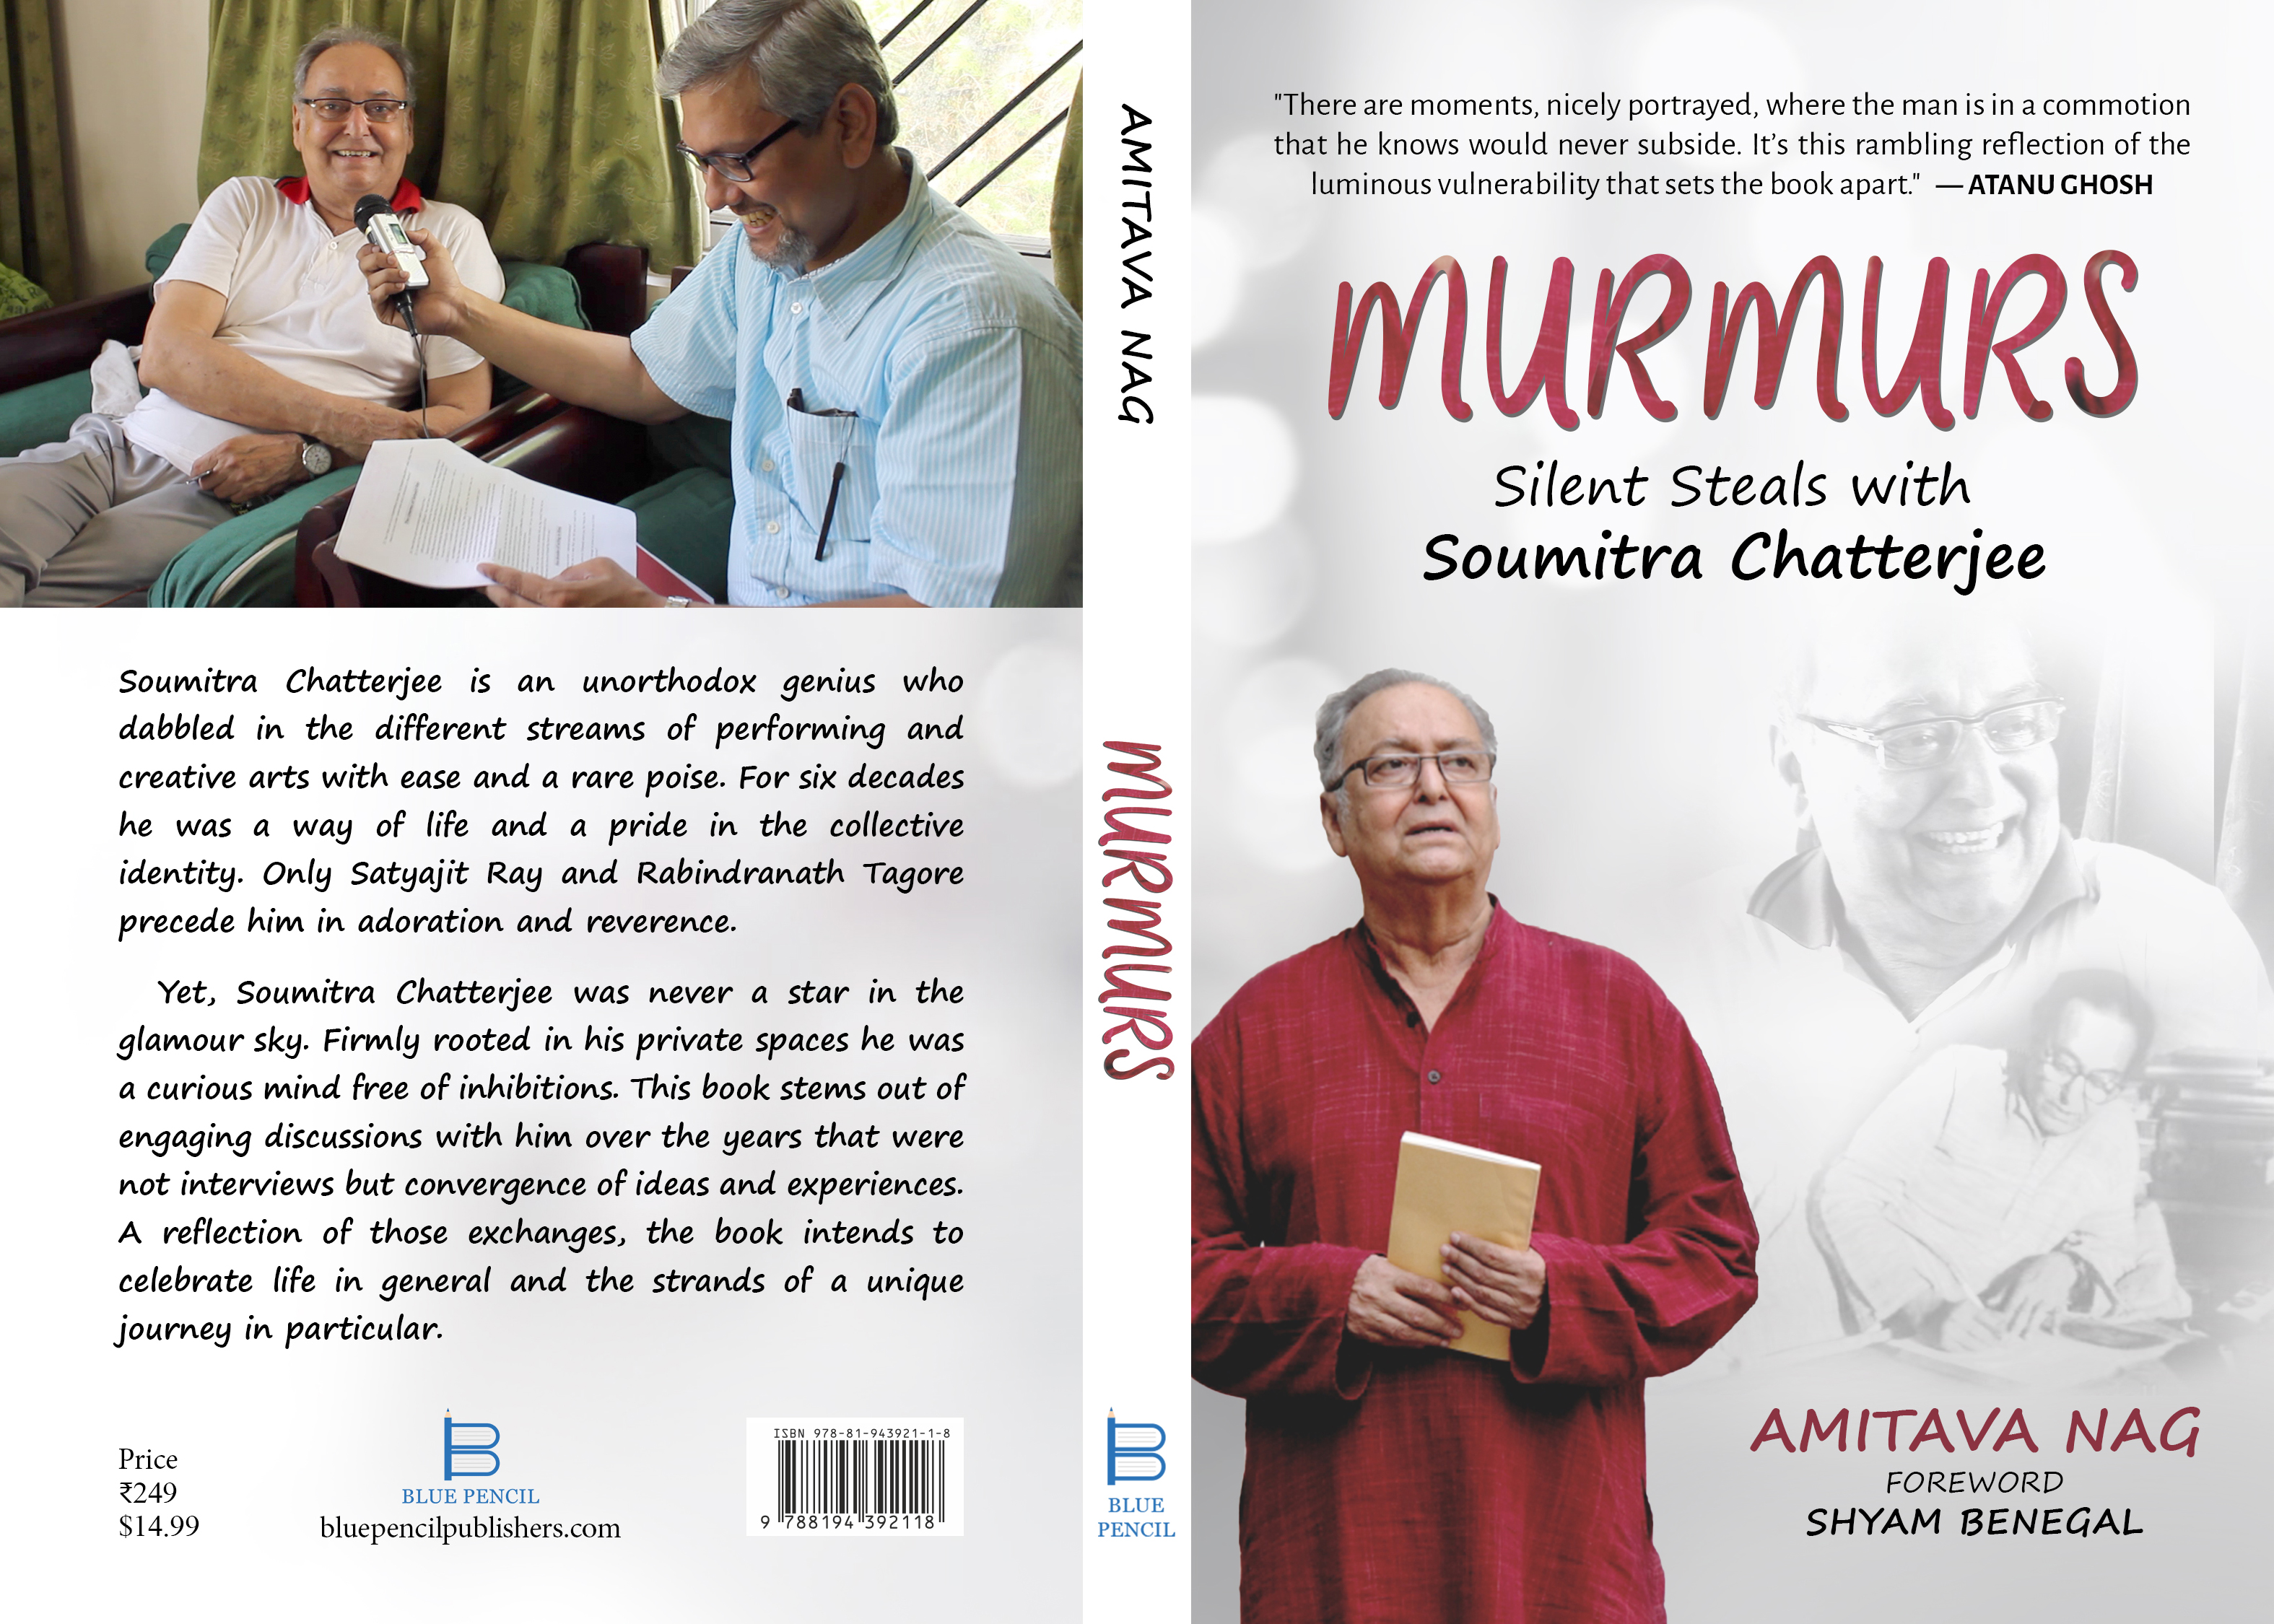 Murmurs: Silent Steals with Soumitra Chatterjee